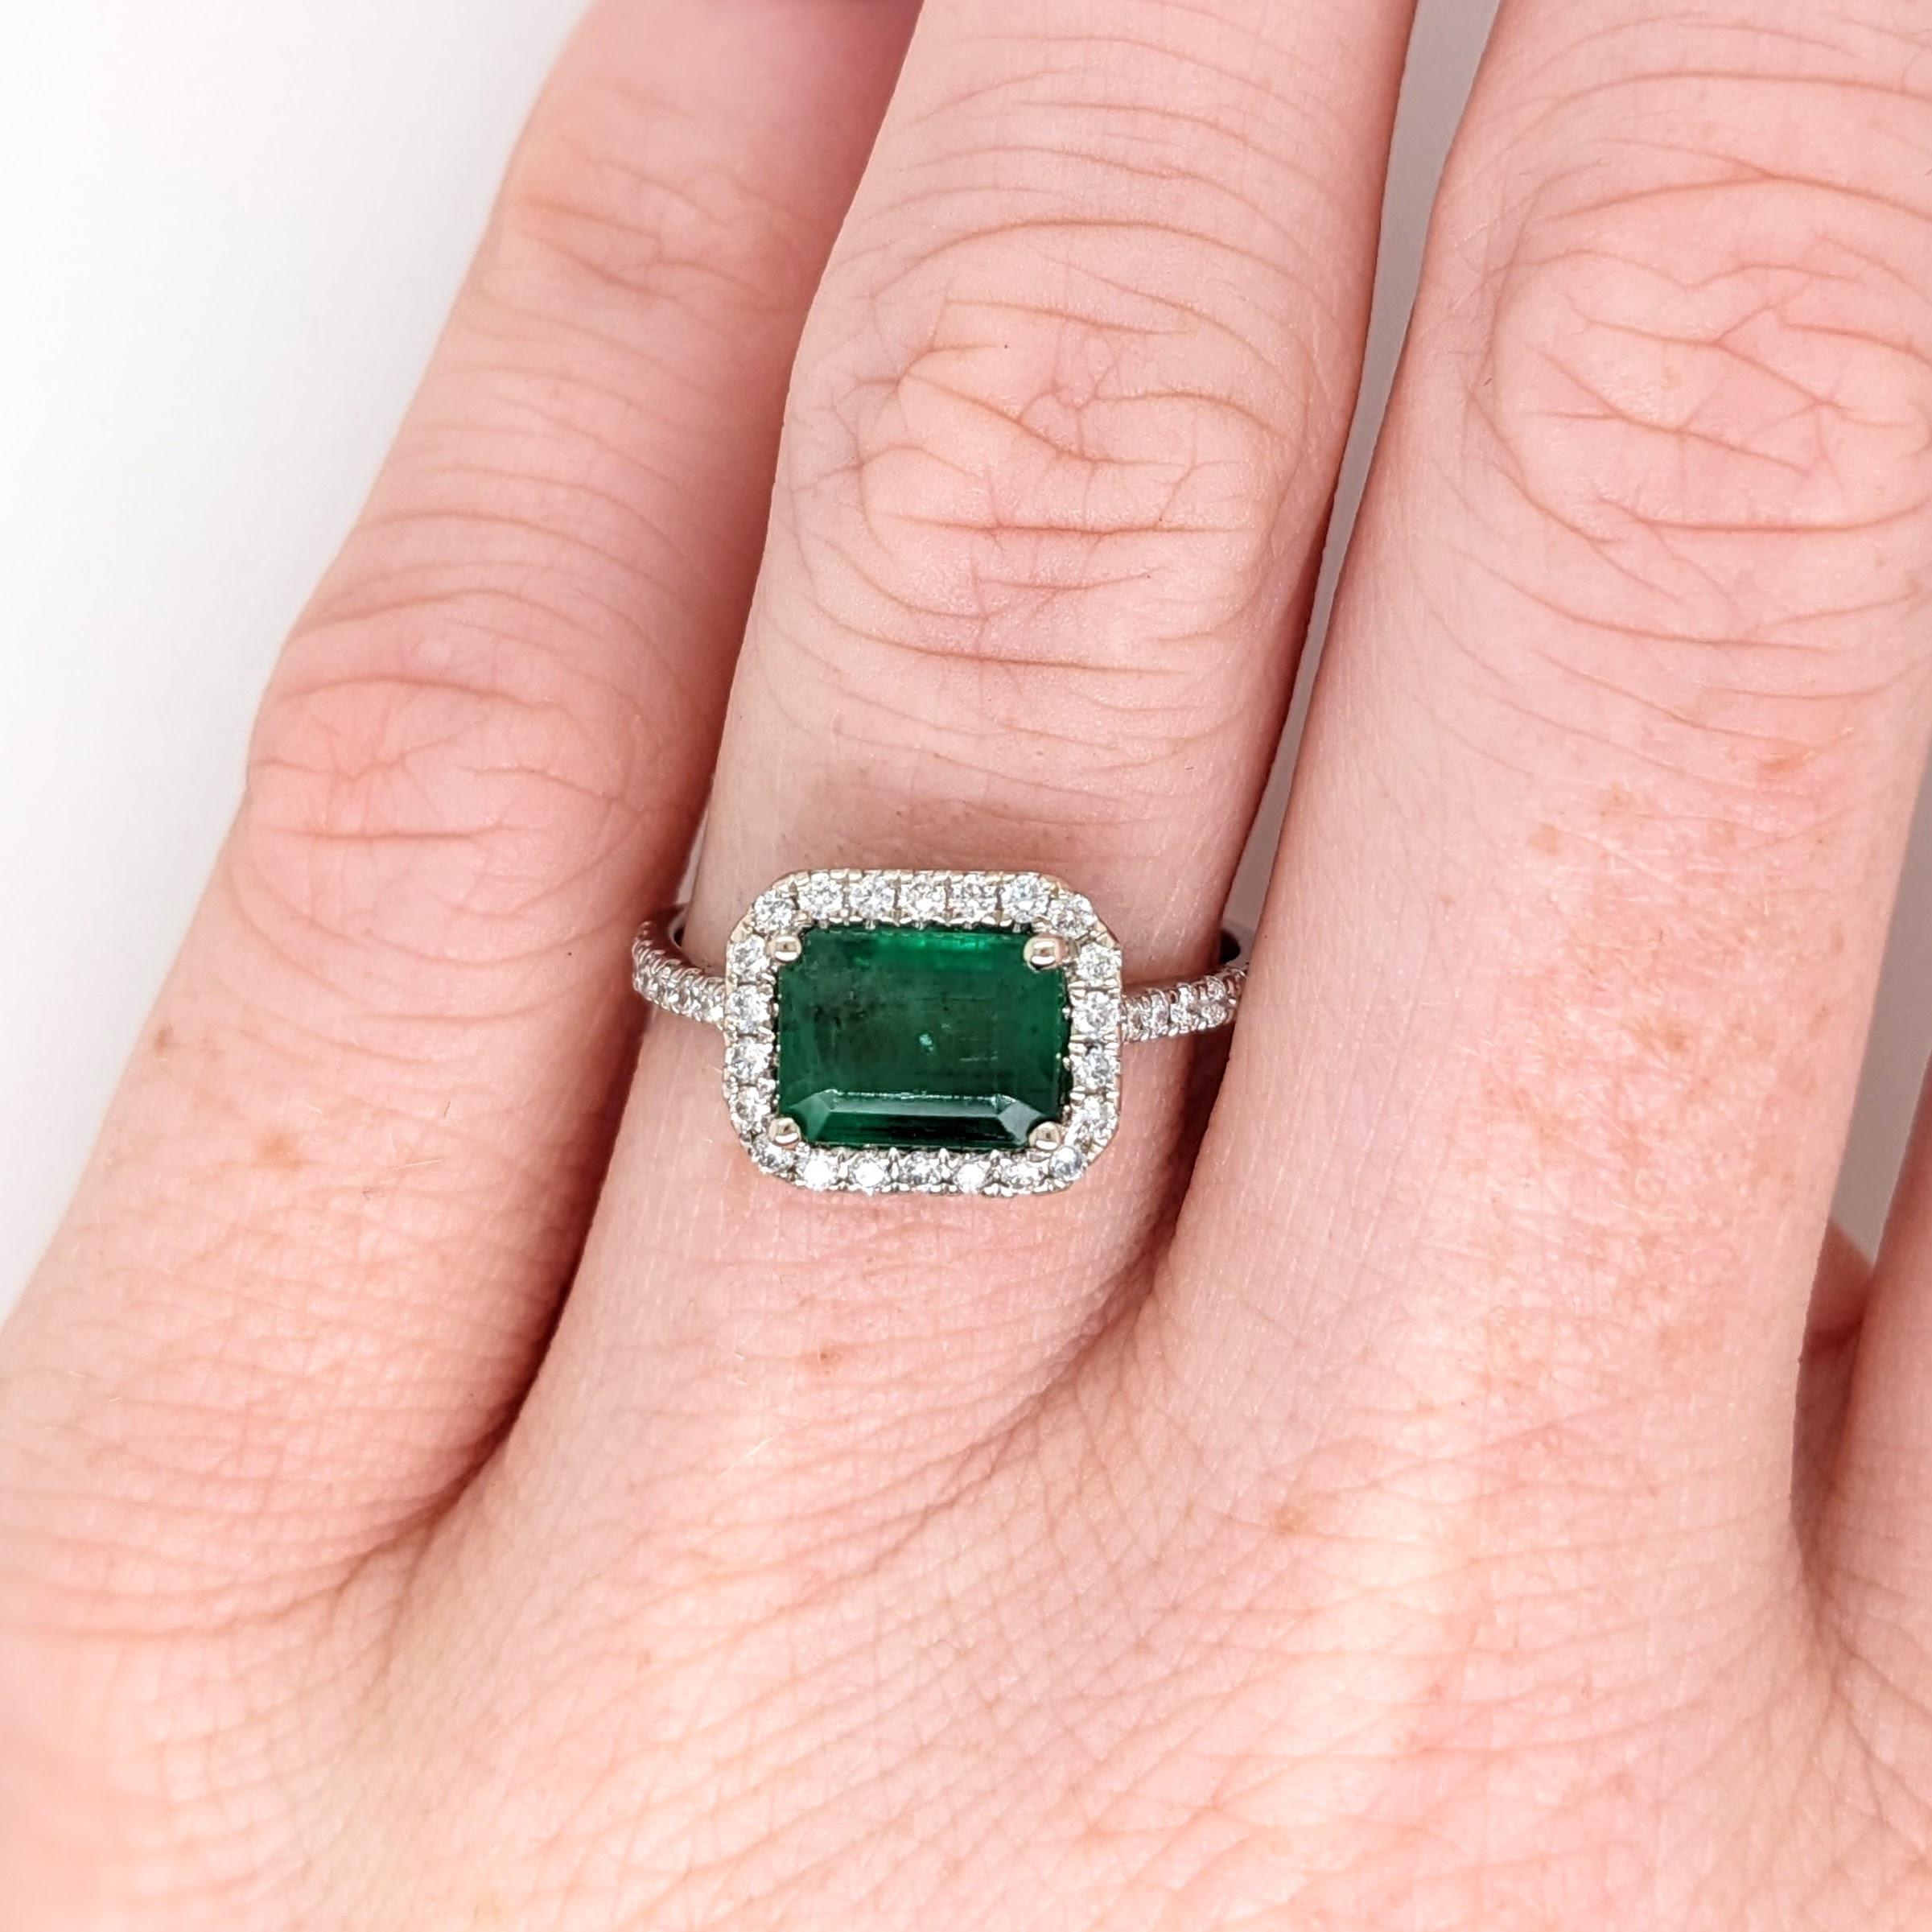 This classic NNJ ring design features a 1.21 carat east west emerald gemstone with natural earth-mined diamonds all set in 14k gold and can be customized to fit your needs. This ring also makes a beautiful May birthstone ring for your loved